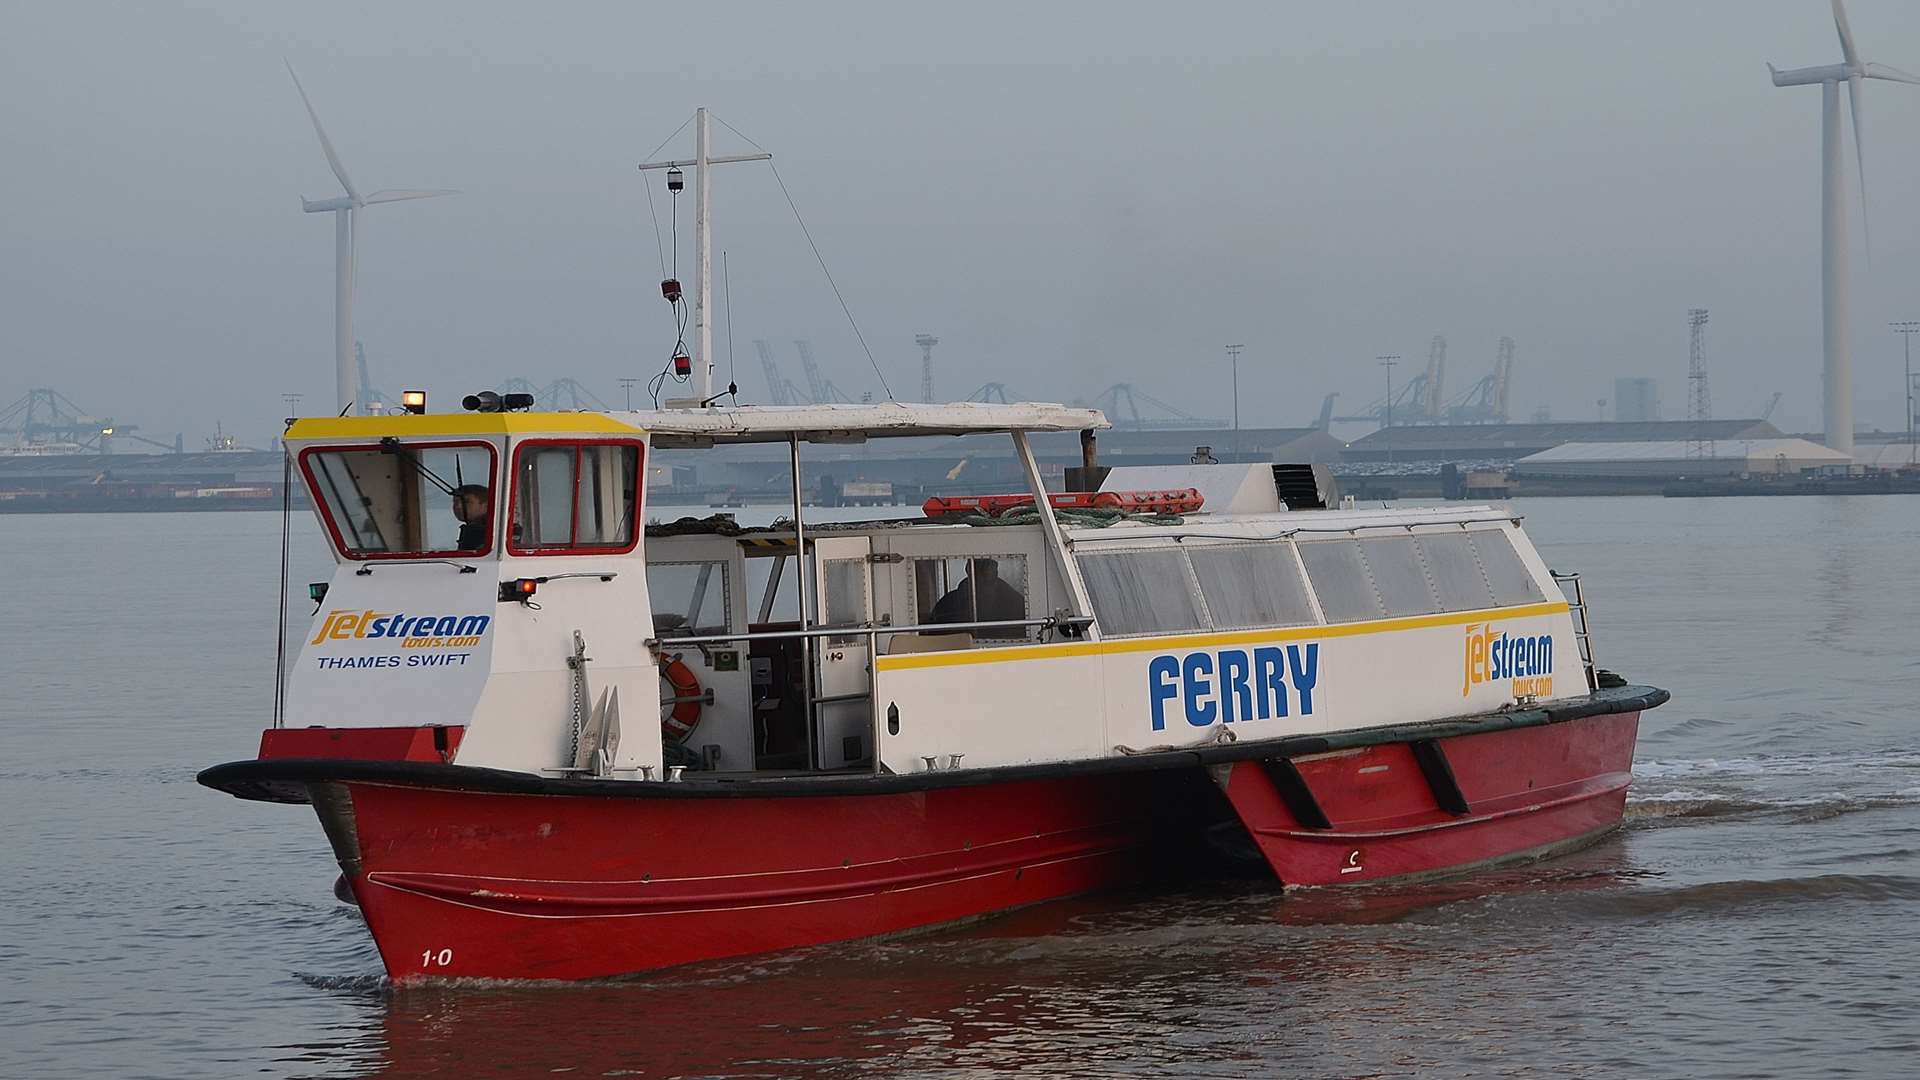 The ferry crosses the River Thames between Gravesend and Tilbury. Picture: Jason Arthur